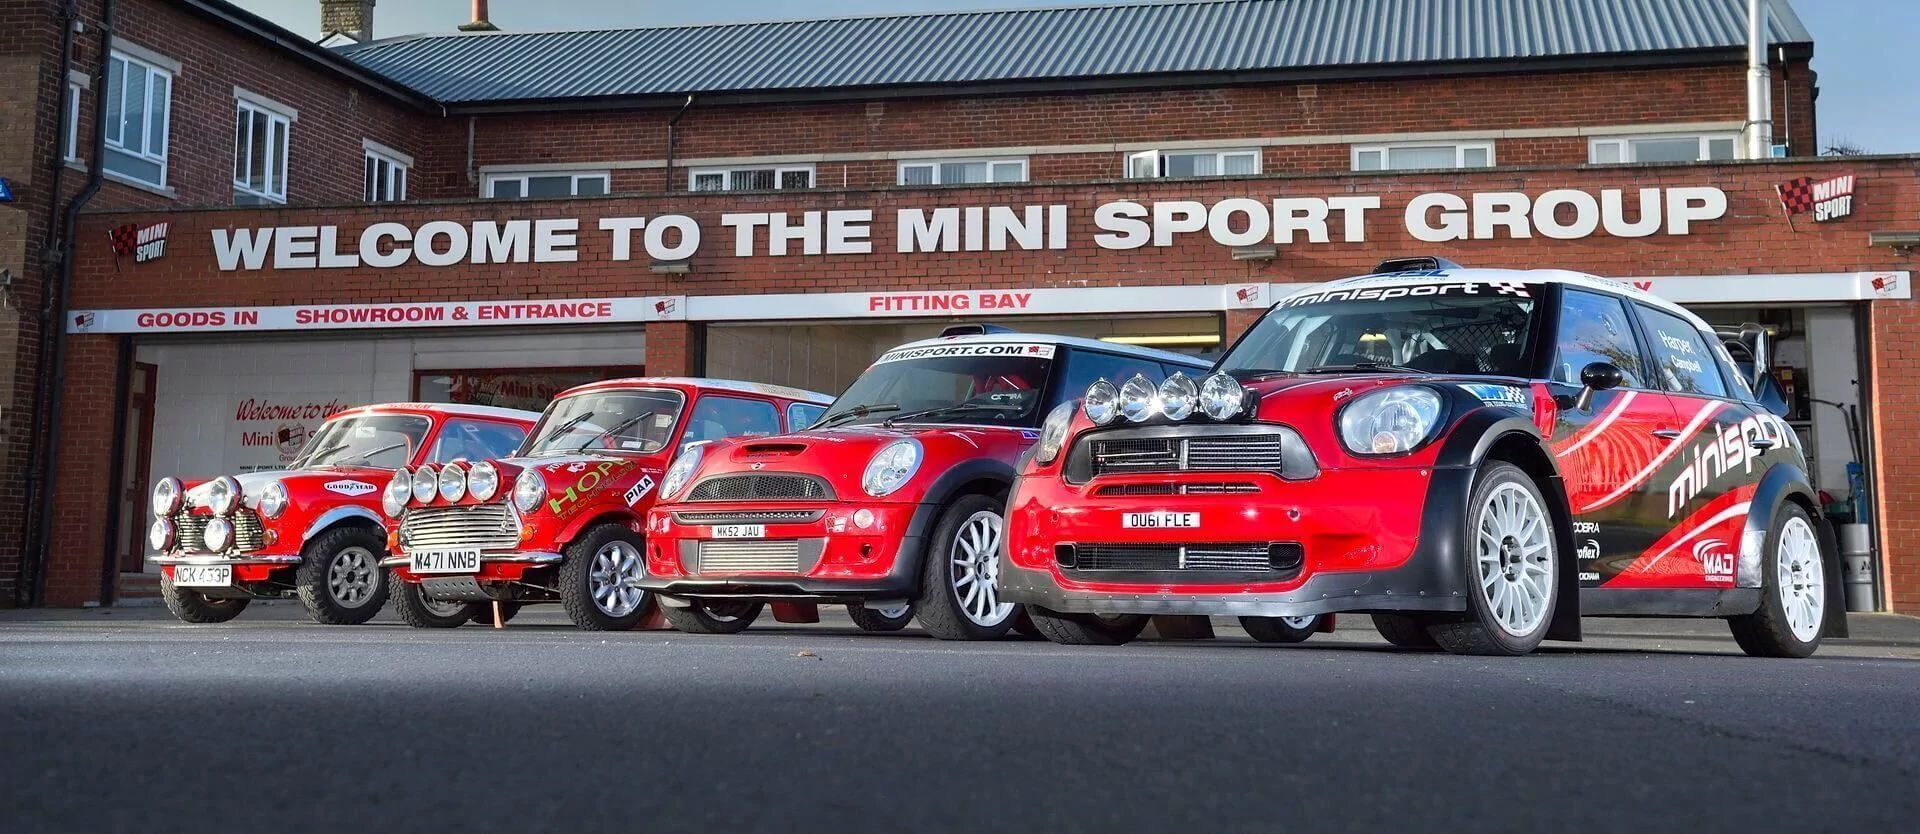 Welcome to Mini Sport